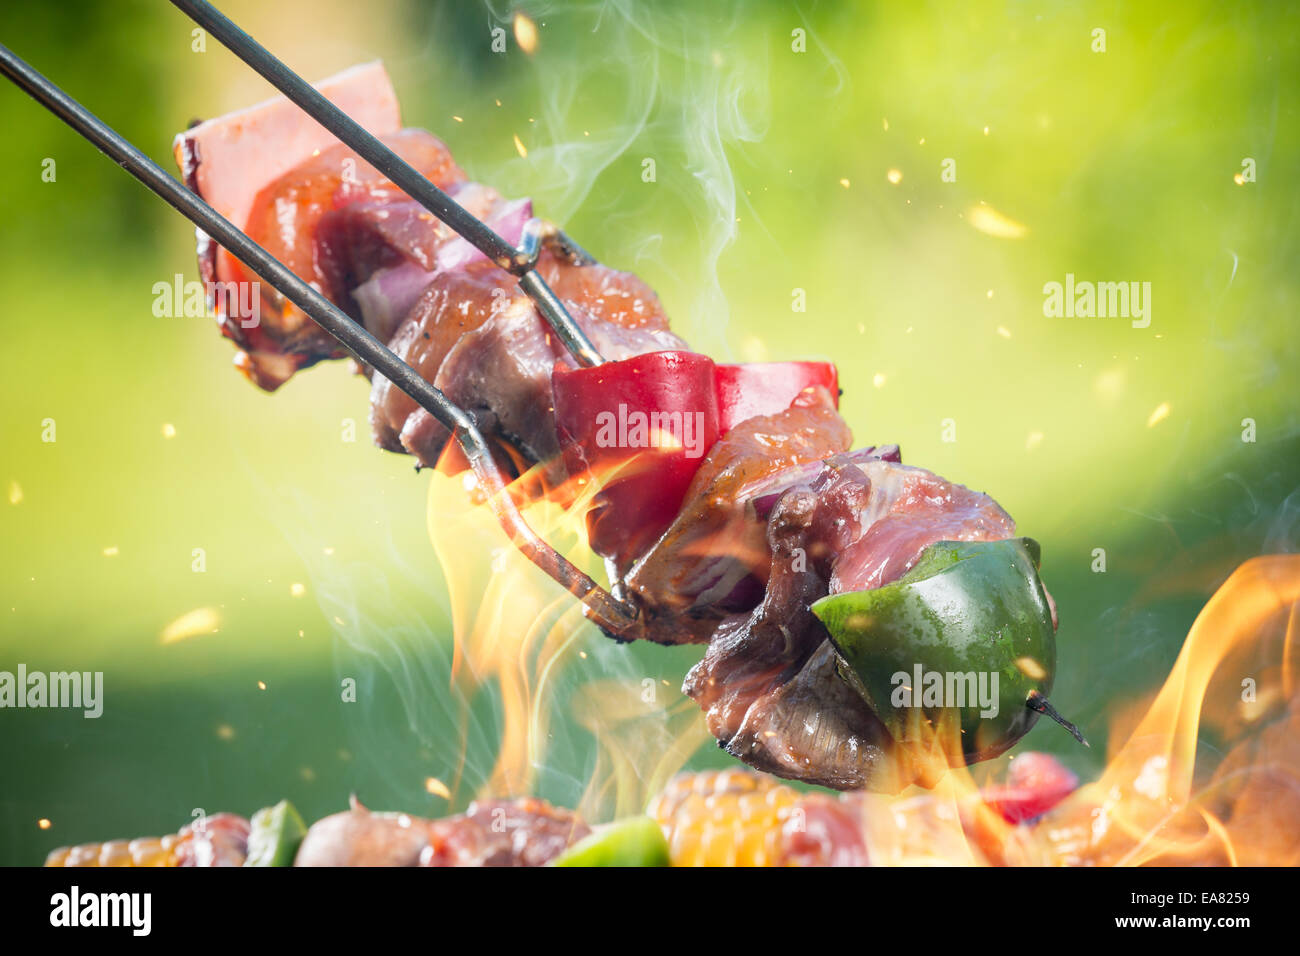 Delicious grilled meat skewers on fire Stock Photo